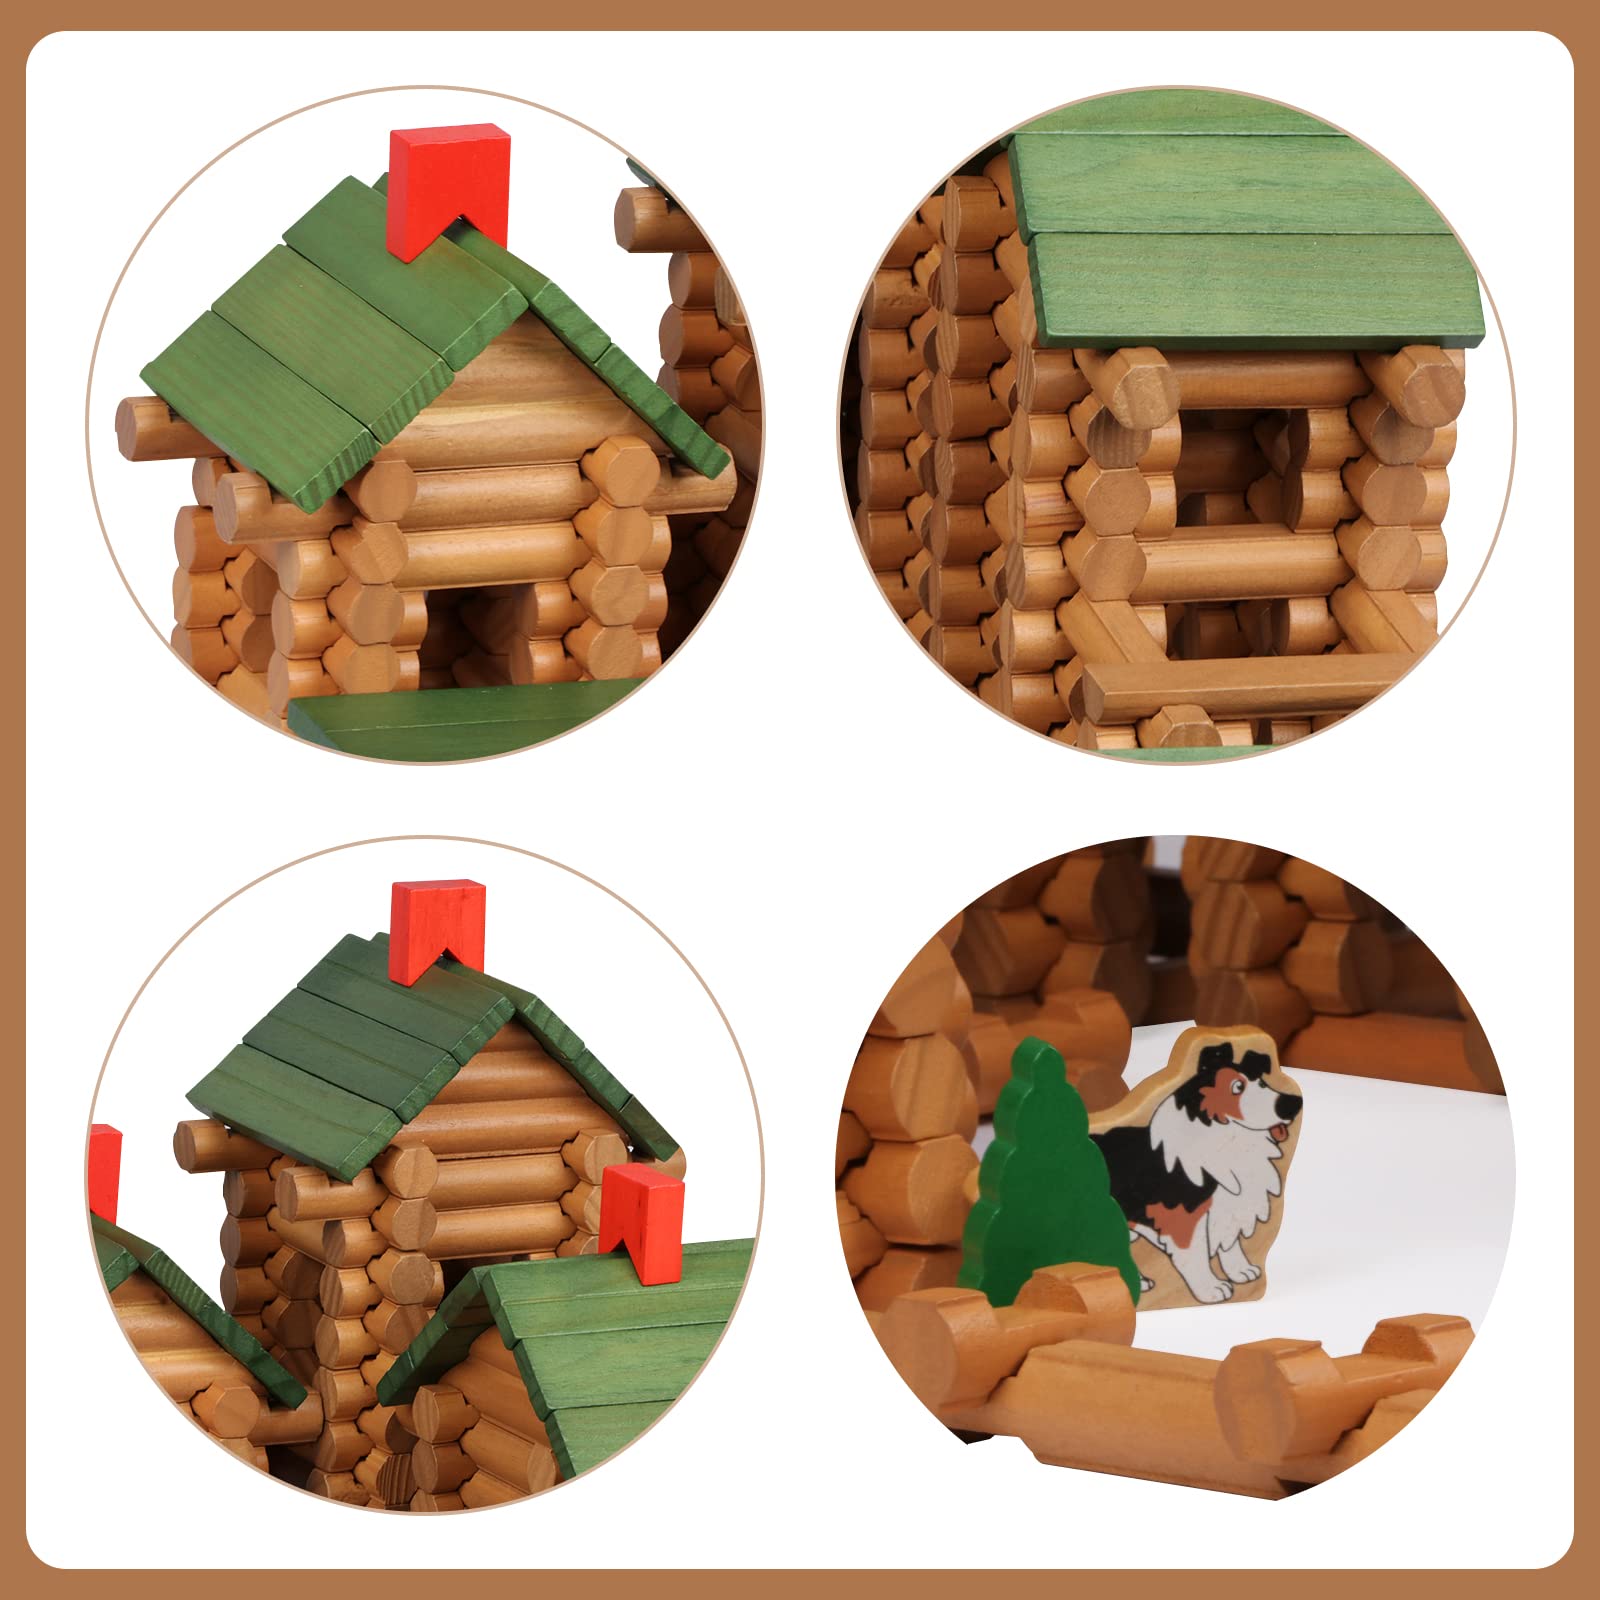 Wondertoys 530 Pcs Wooden Logs Set Ages 3+, Classic Building Log Toys for Boy, Creative Construction Engineering Educational Gifts